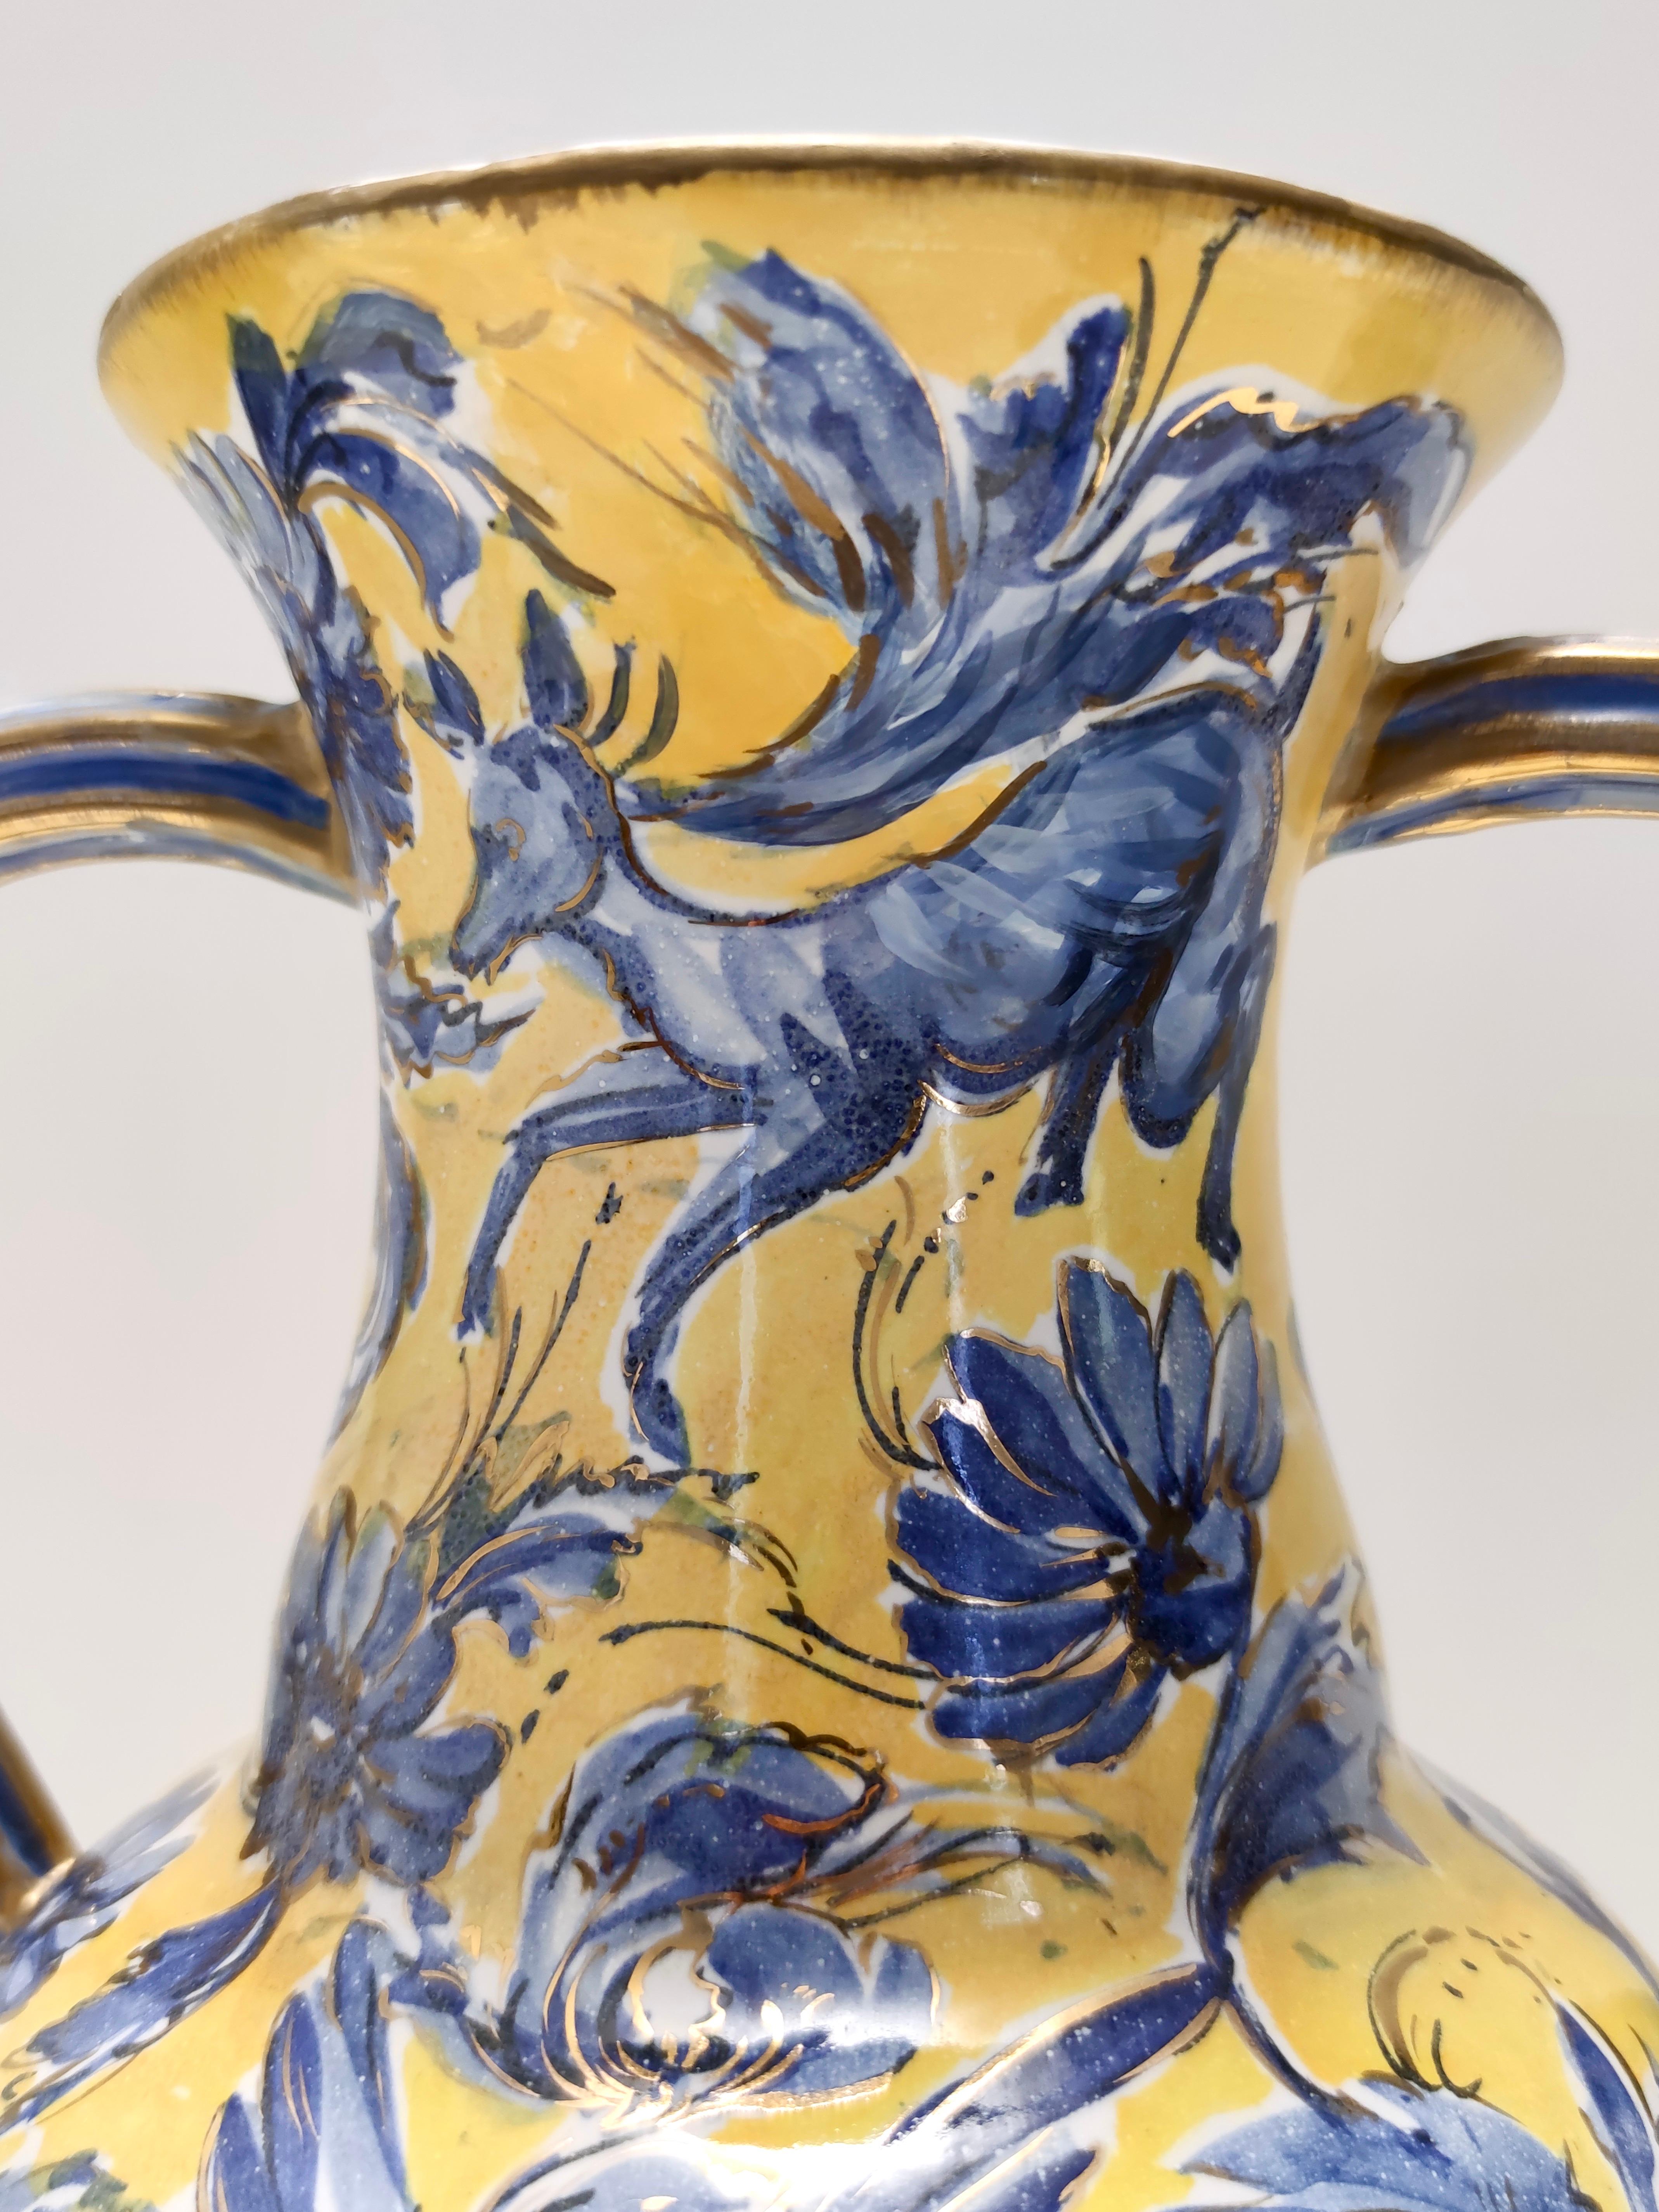 Handmade Yellow and Blue Glazed Ceramic Amphora Vase by Zulimo Aretini, Italy For Sale 8